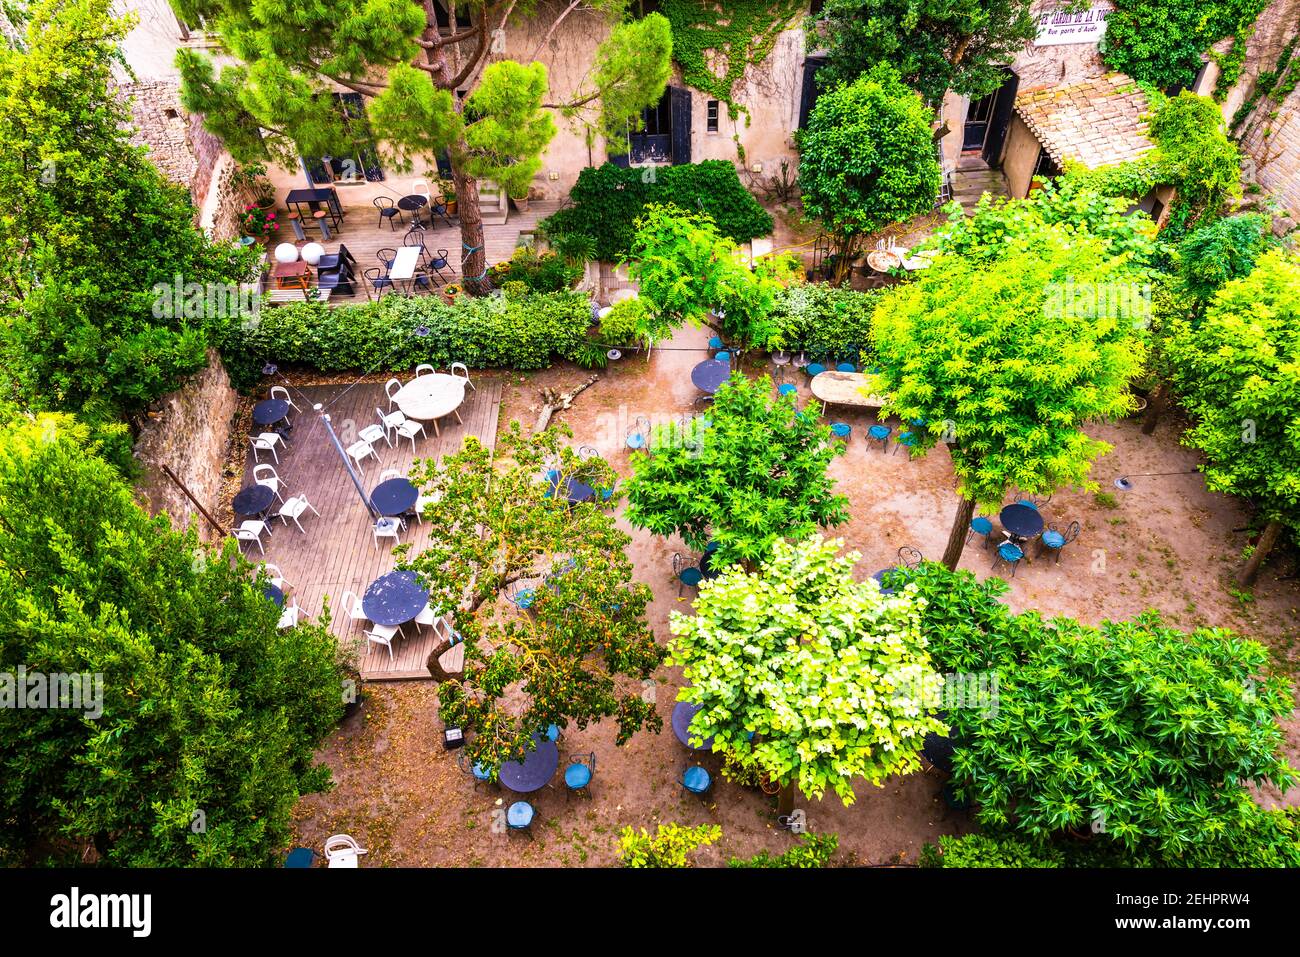 Aerial view of a garden full of greenery Stock Photo